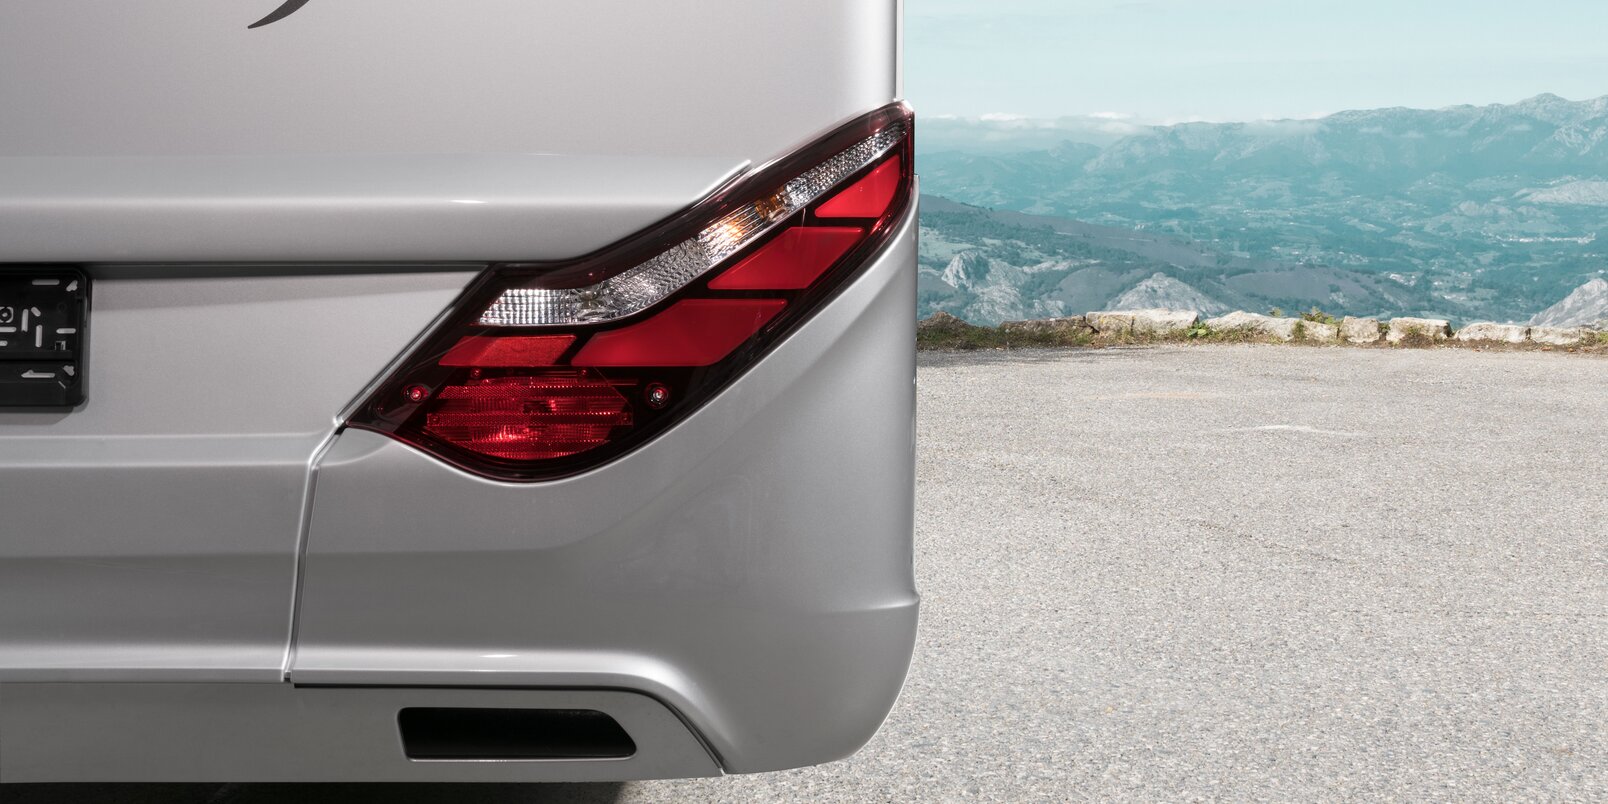 Rear light on the right of the HYMER Exsis-i, which is in a parking lot with a mountain panorama